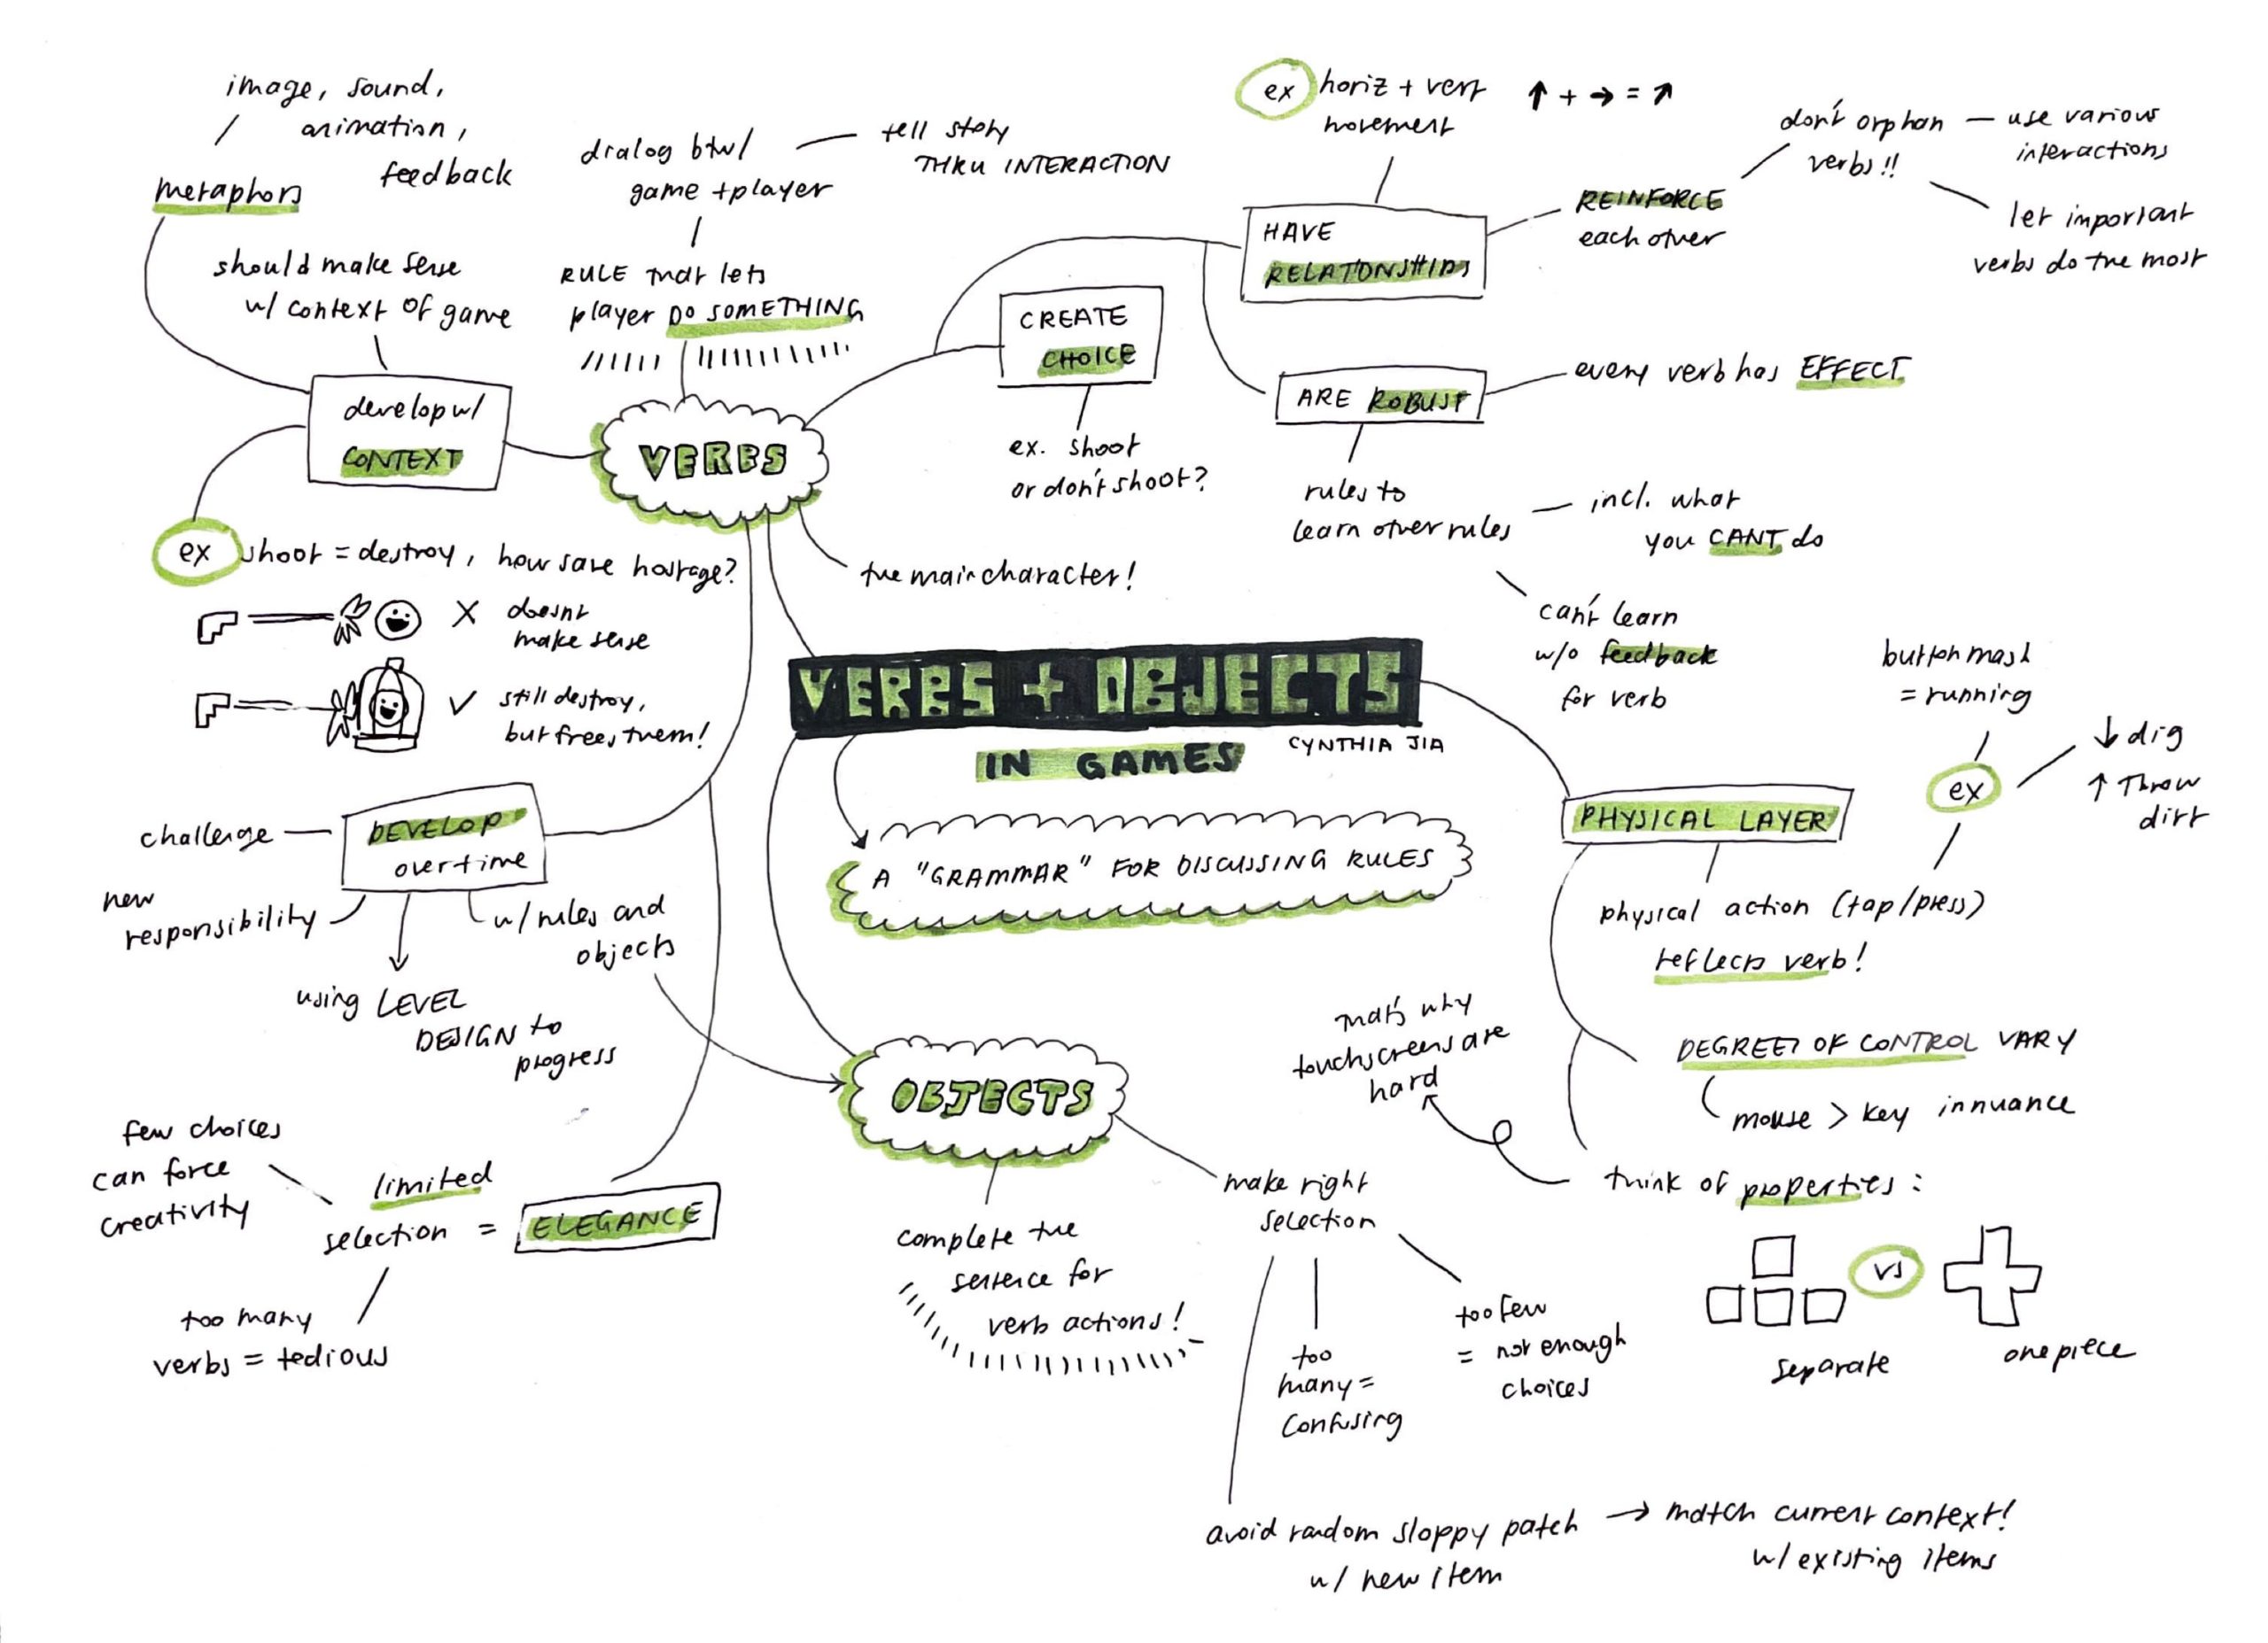 a mindmap with "verbs + objects" at the center and main ideas branching from it